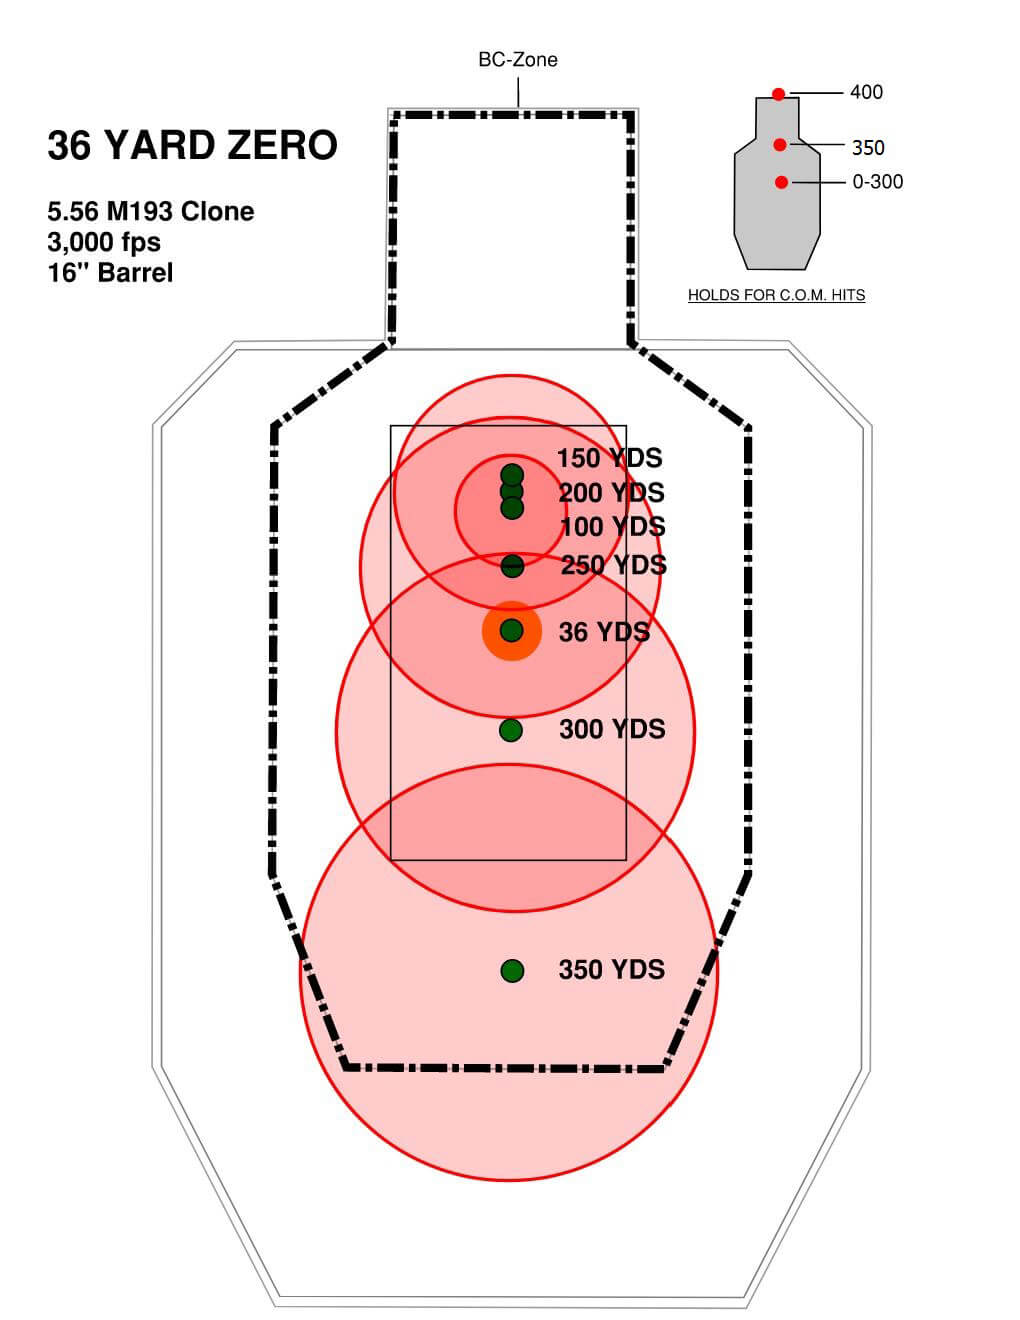 This is a target demonstrating the impact locations of M193 55-grain FMJ bullets. As you can see, the 100, 150, and 200 yard impacts are all very close together. From 36 to 250 yards, the impacts are all within a circle that is less than the size of the upper center mass. This makes for a good maximum point blank range in the target shown.